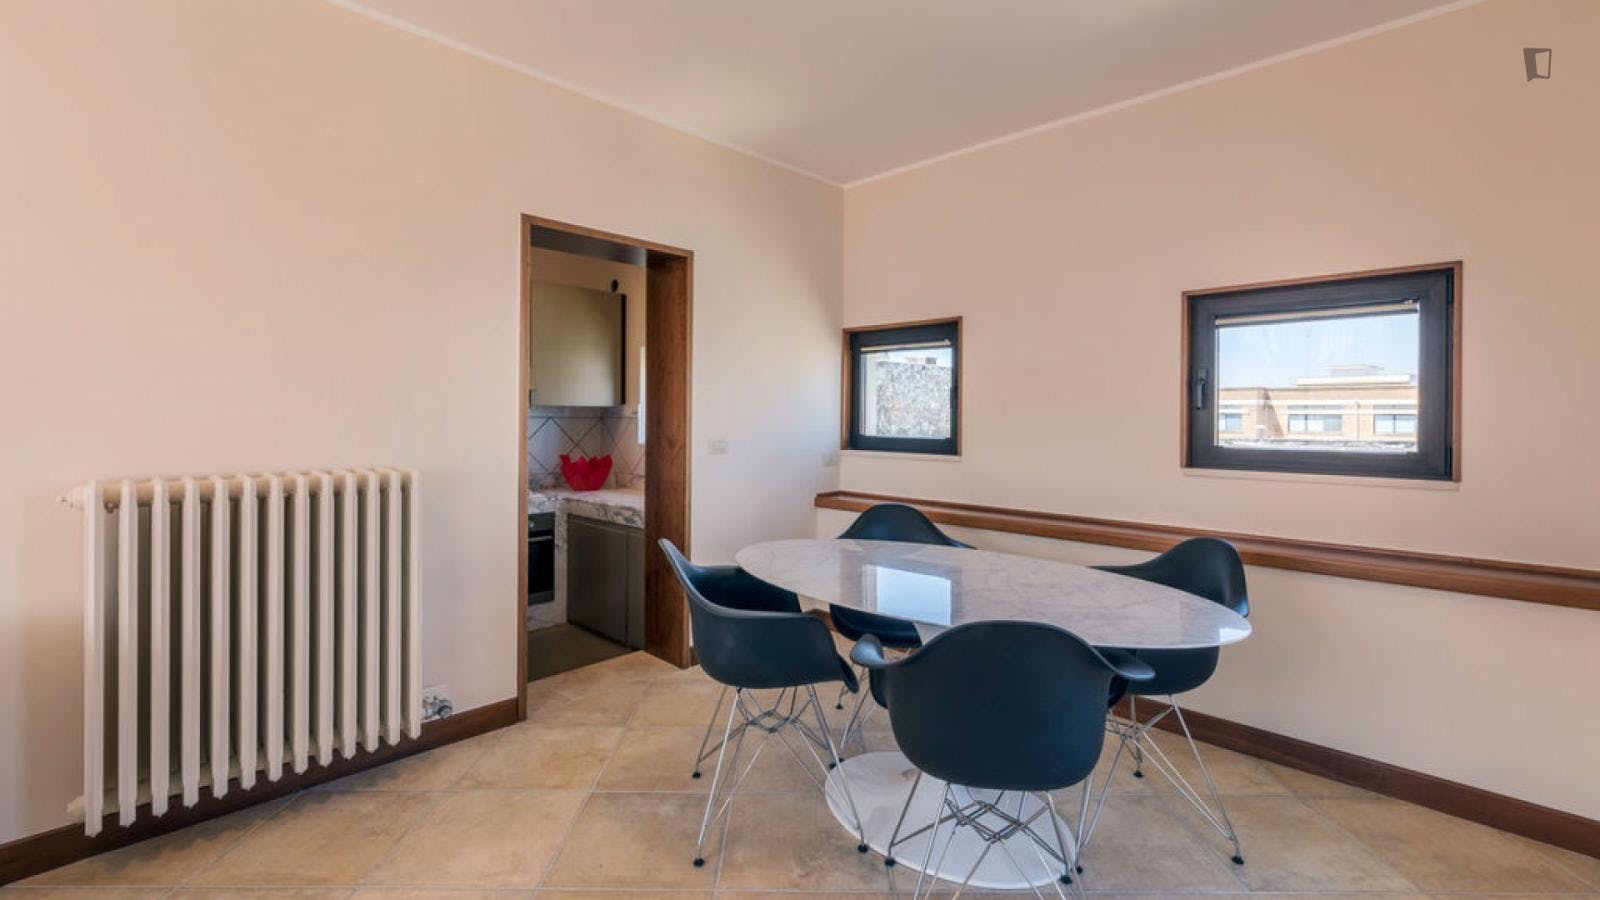 Snug 1-bedroom apartment with large terrace near Villa Reale